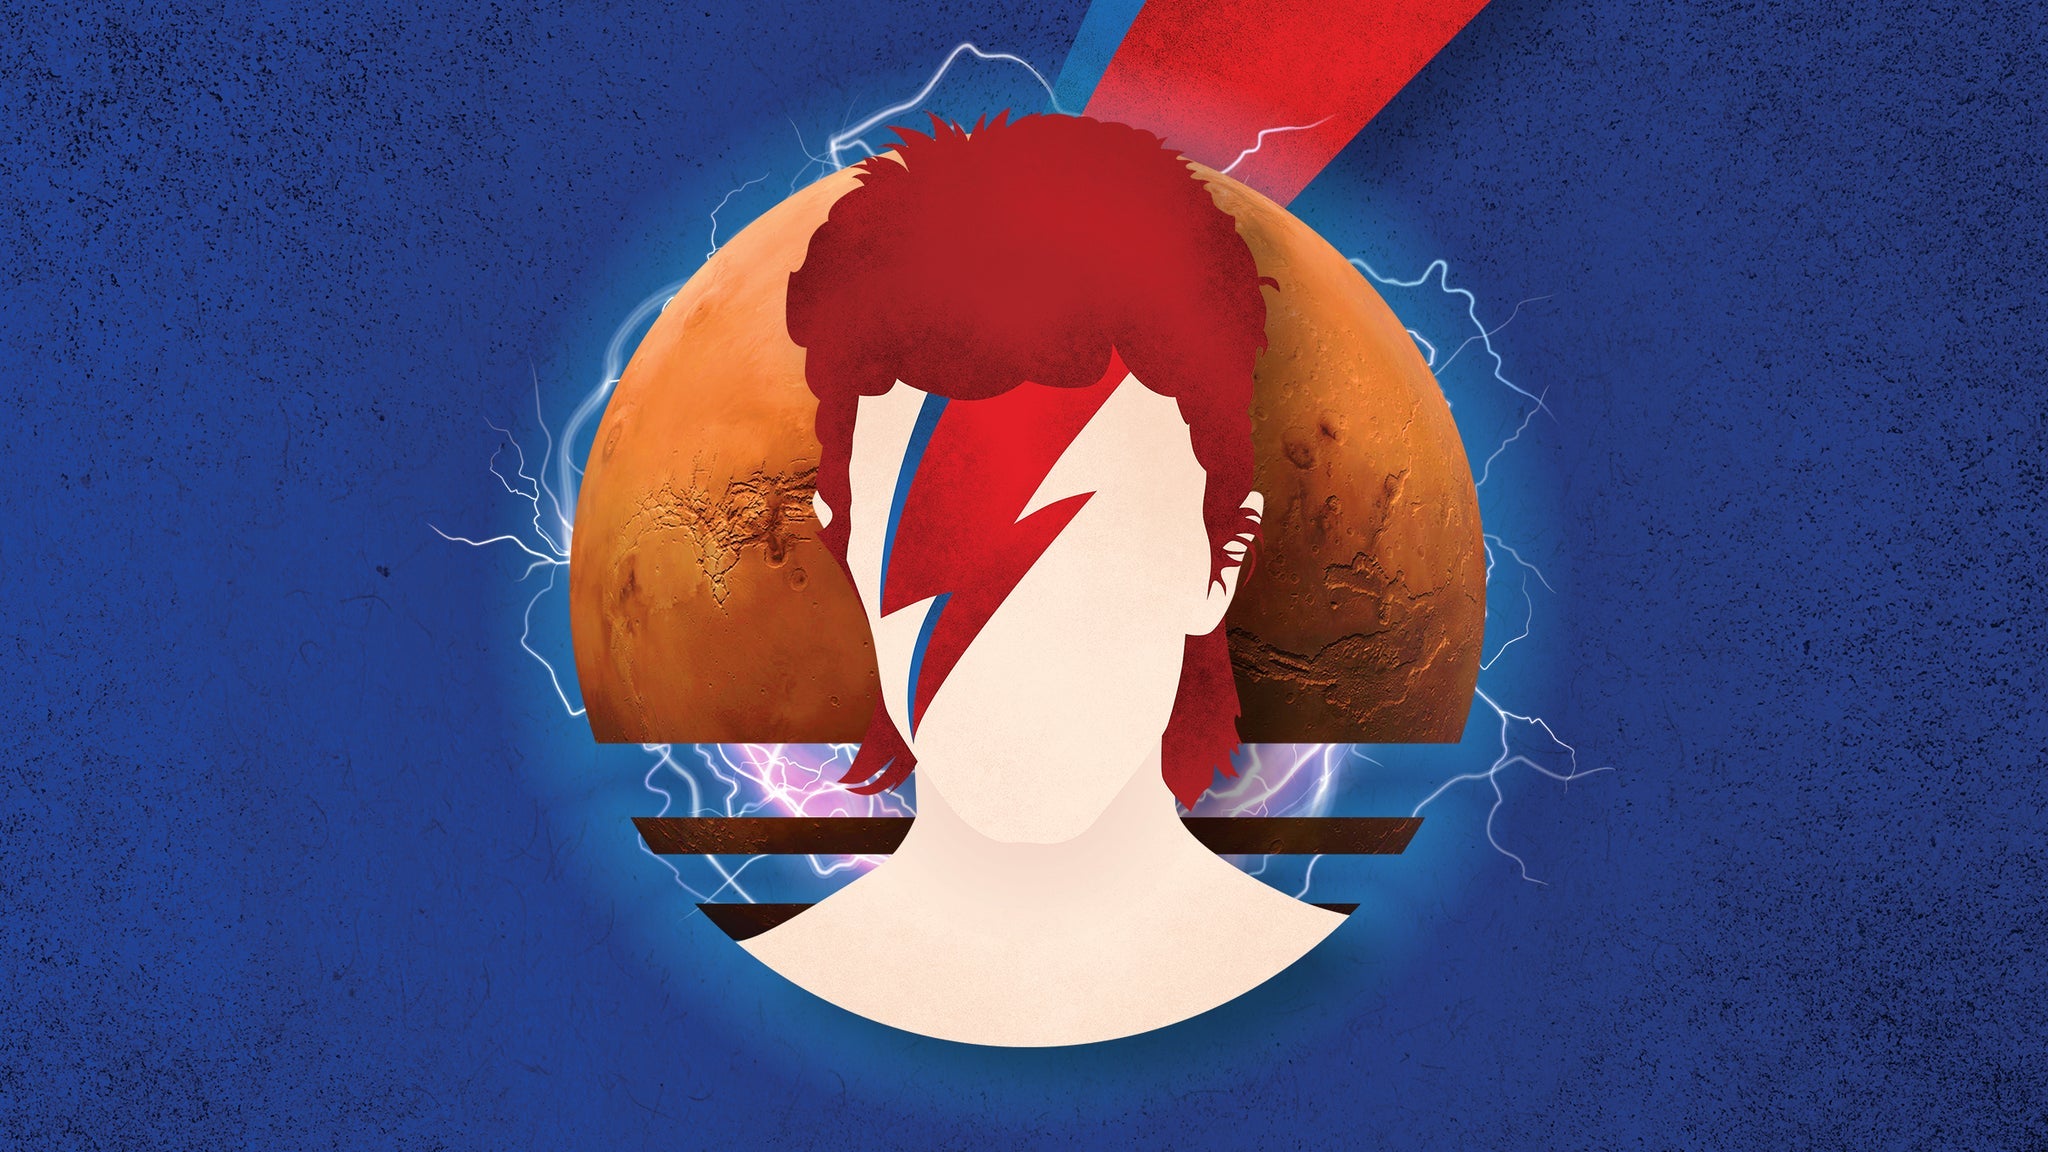 Image used with permission from Ticketmaster | Ashes To Ashes: David Bowie Experience tickets